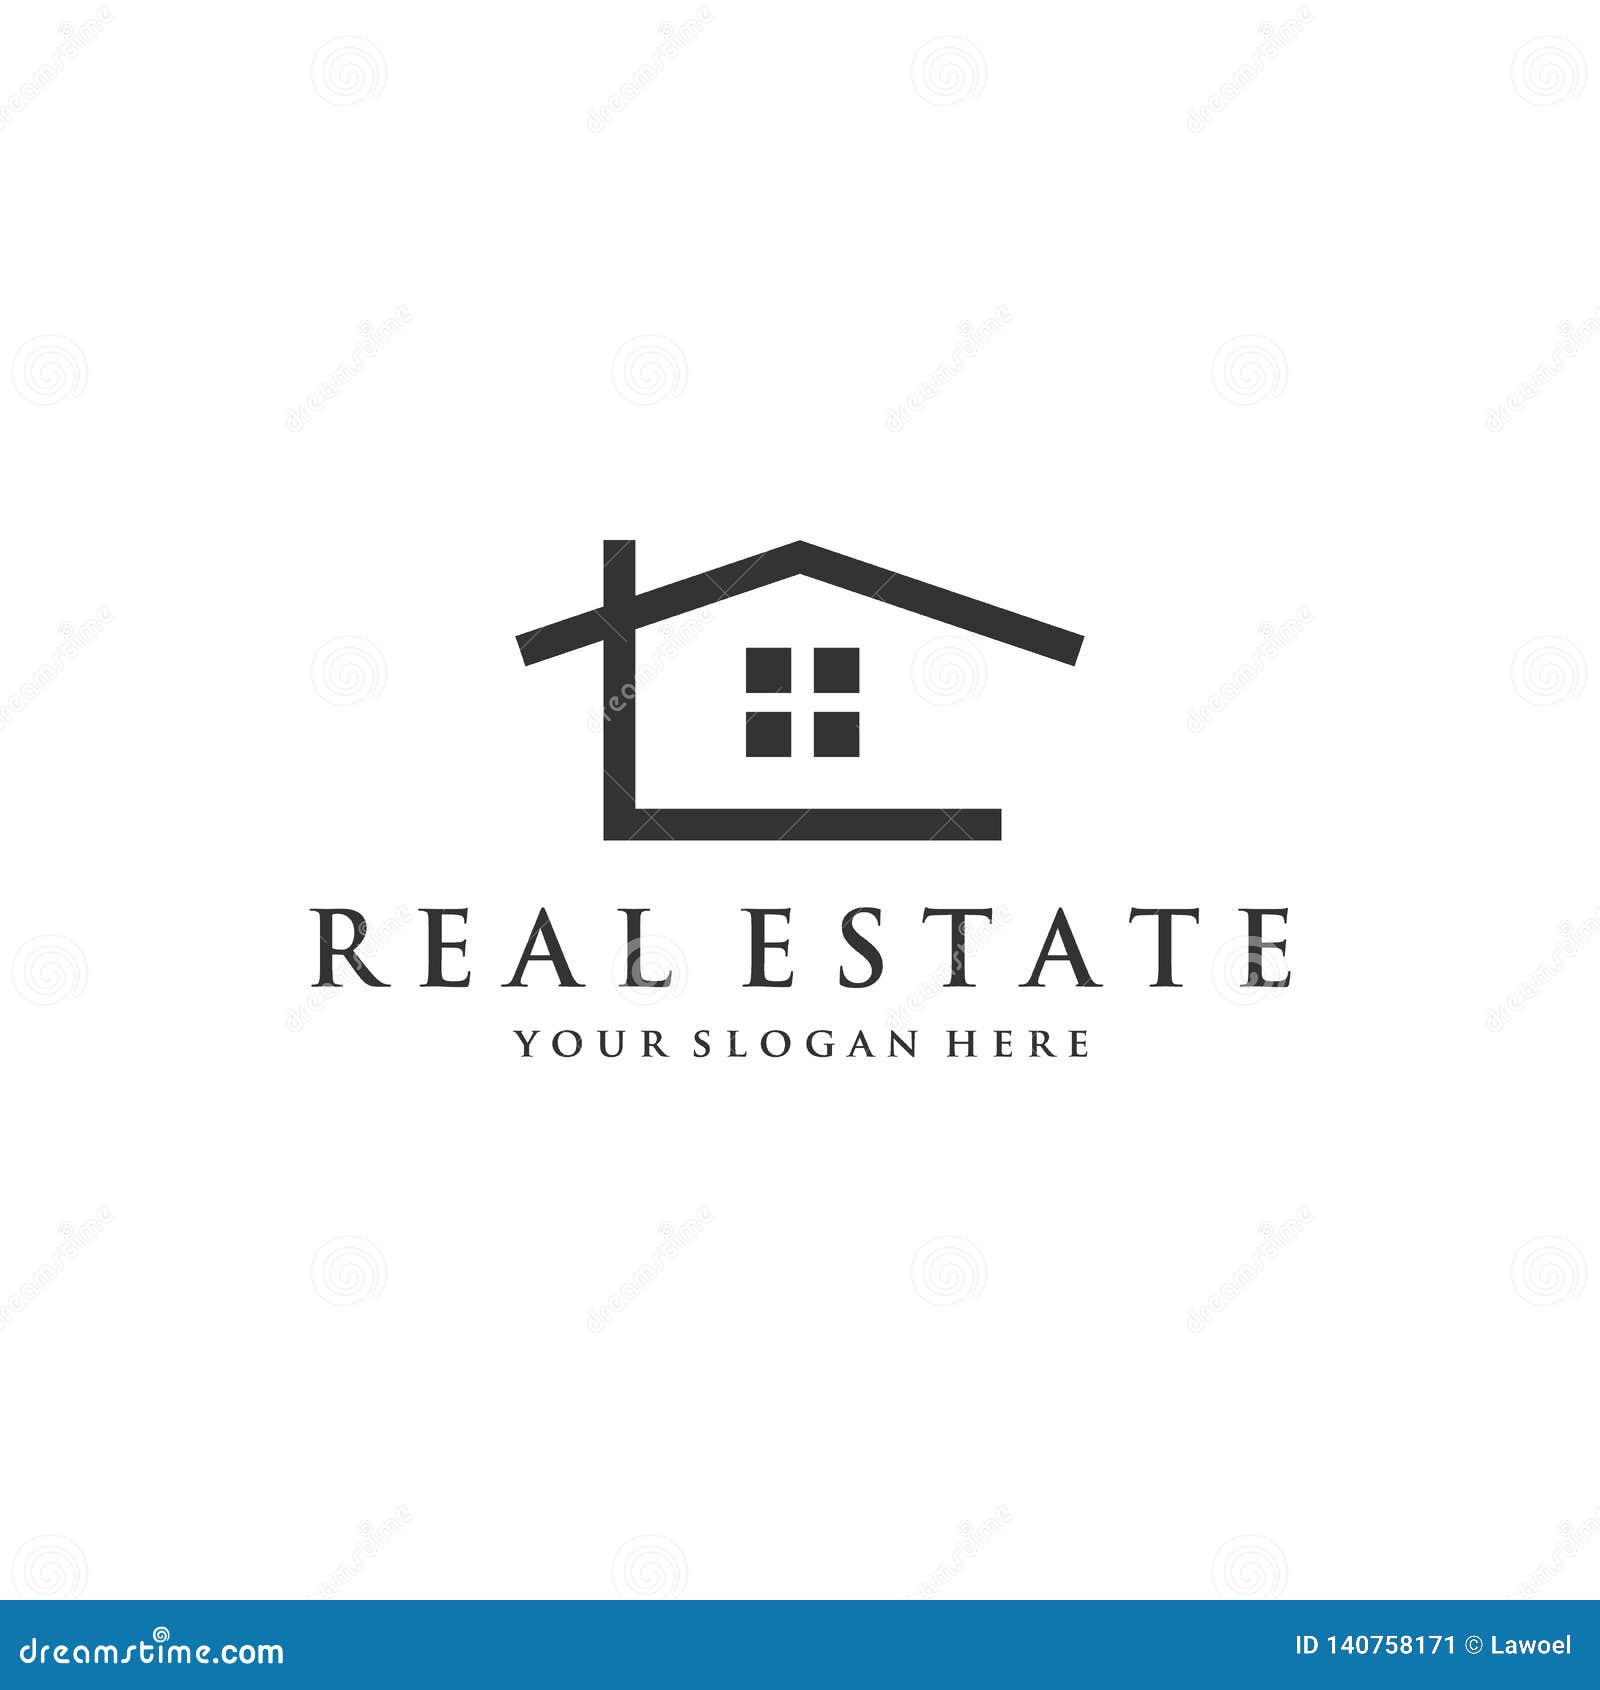 The Real Estate Company of Detroit Lakes - Real Estate In Lakes Country